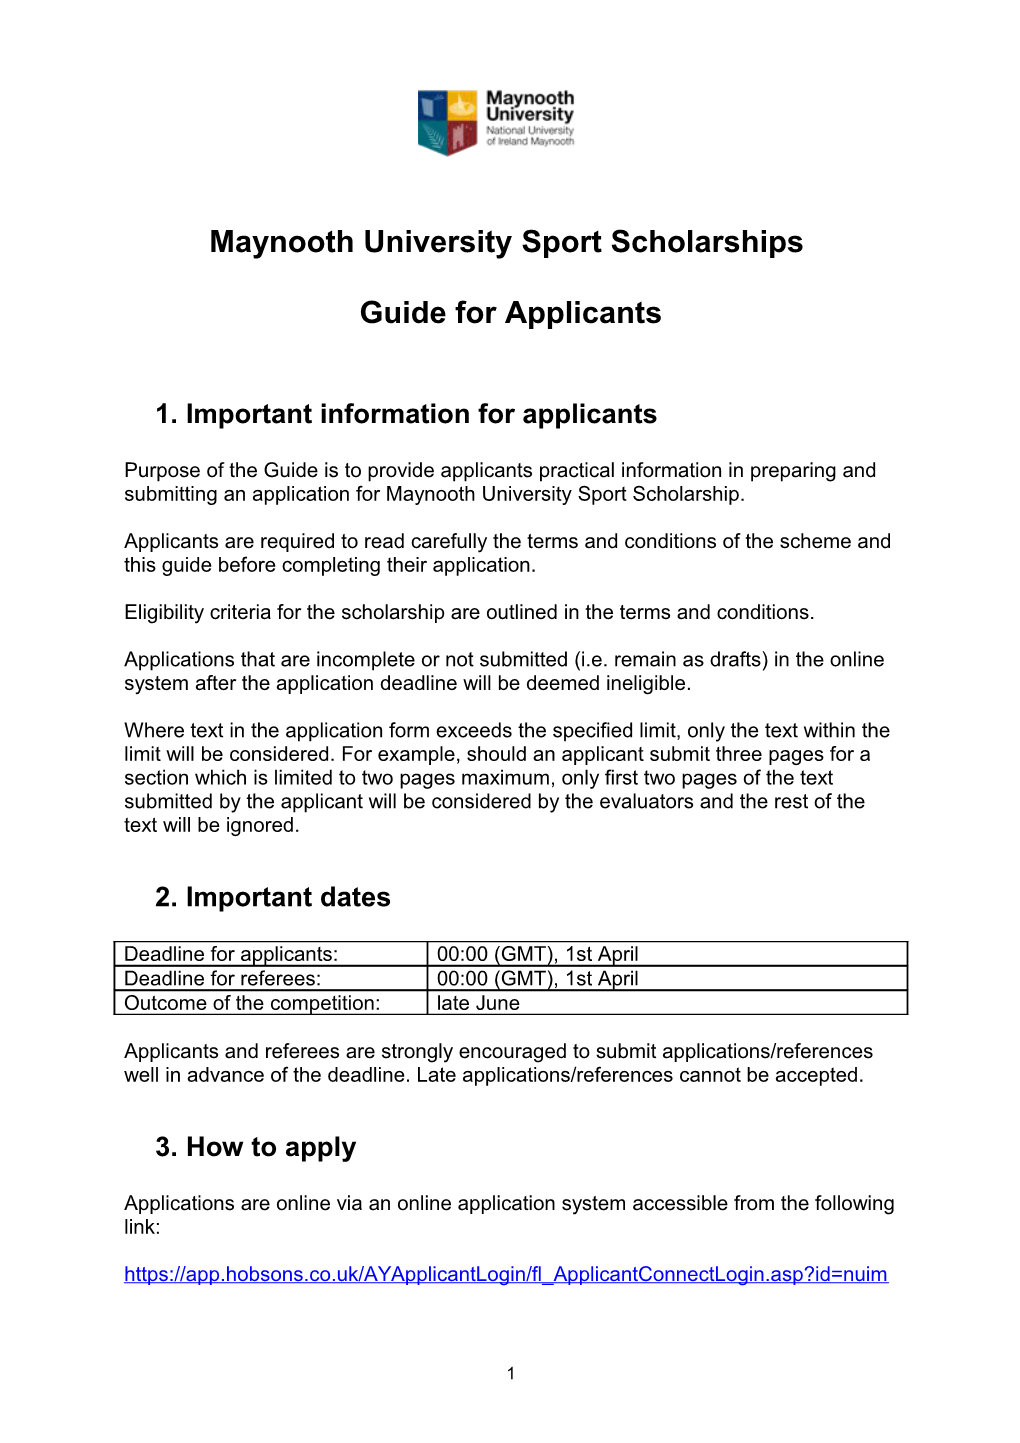 Maynooth University Sport Scholarships Guide for Applicants